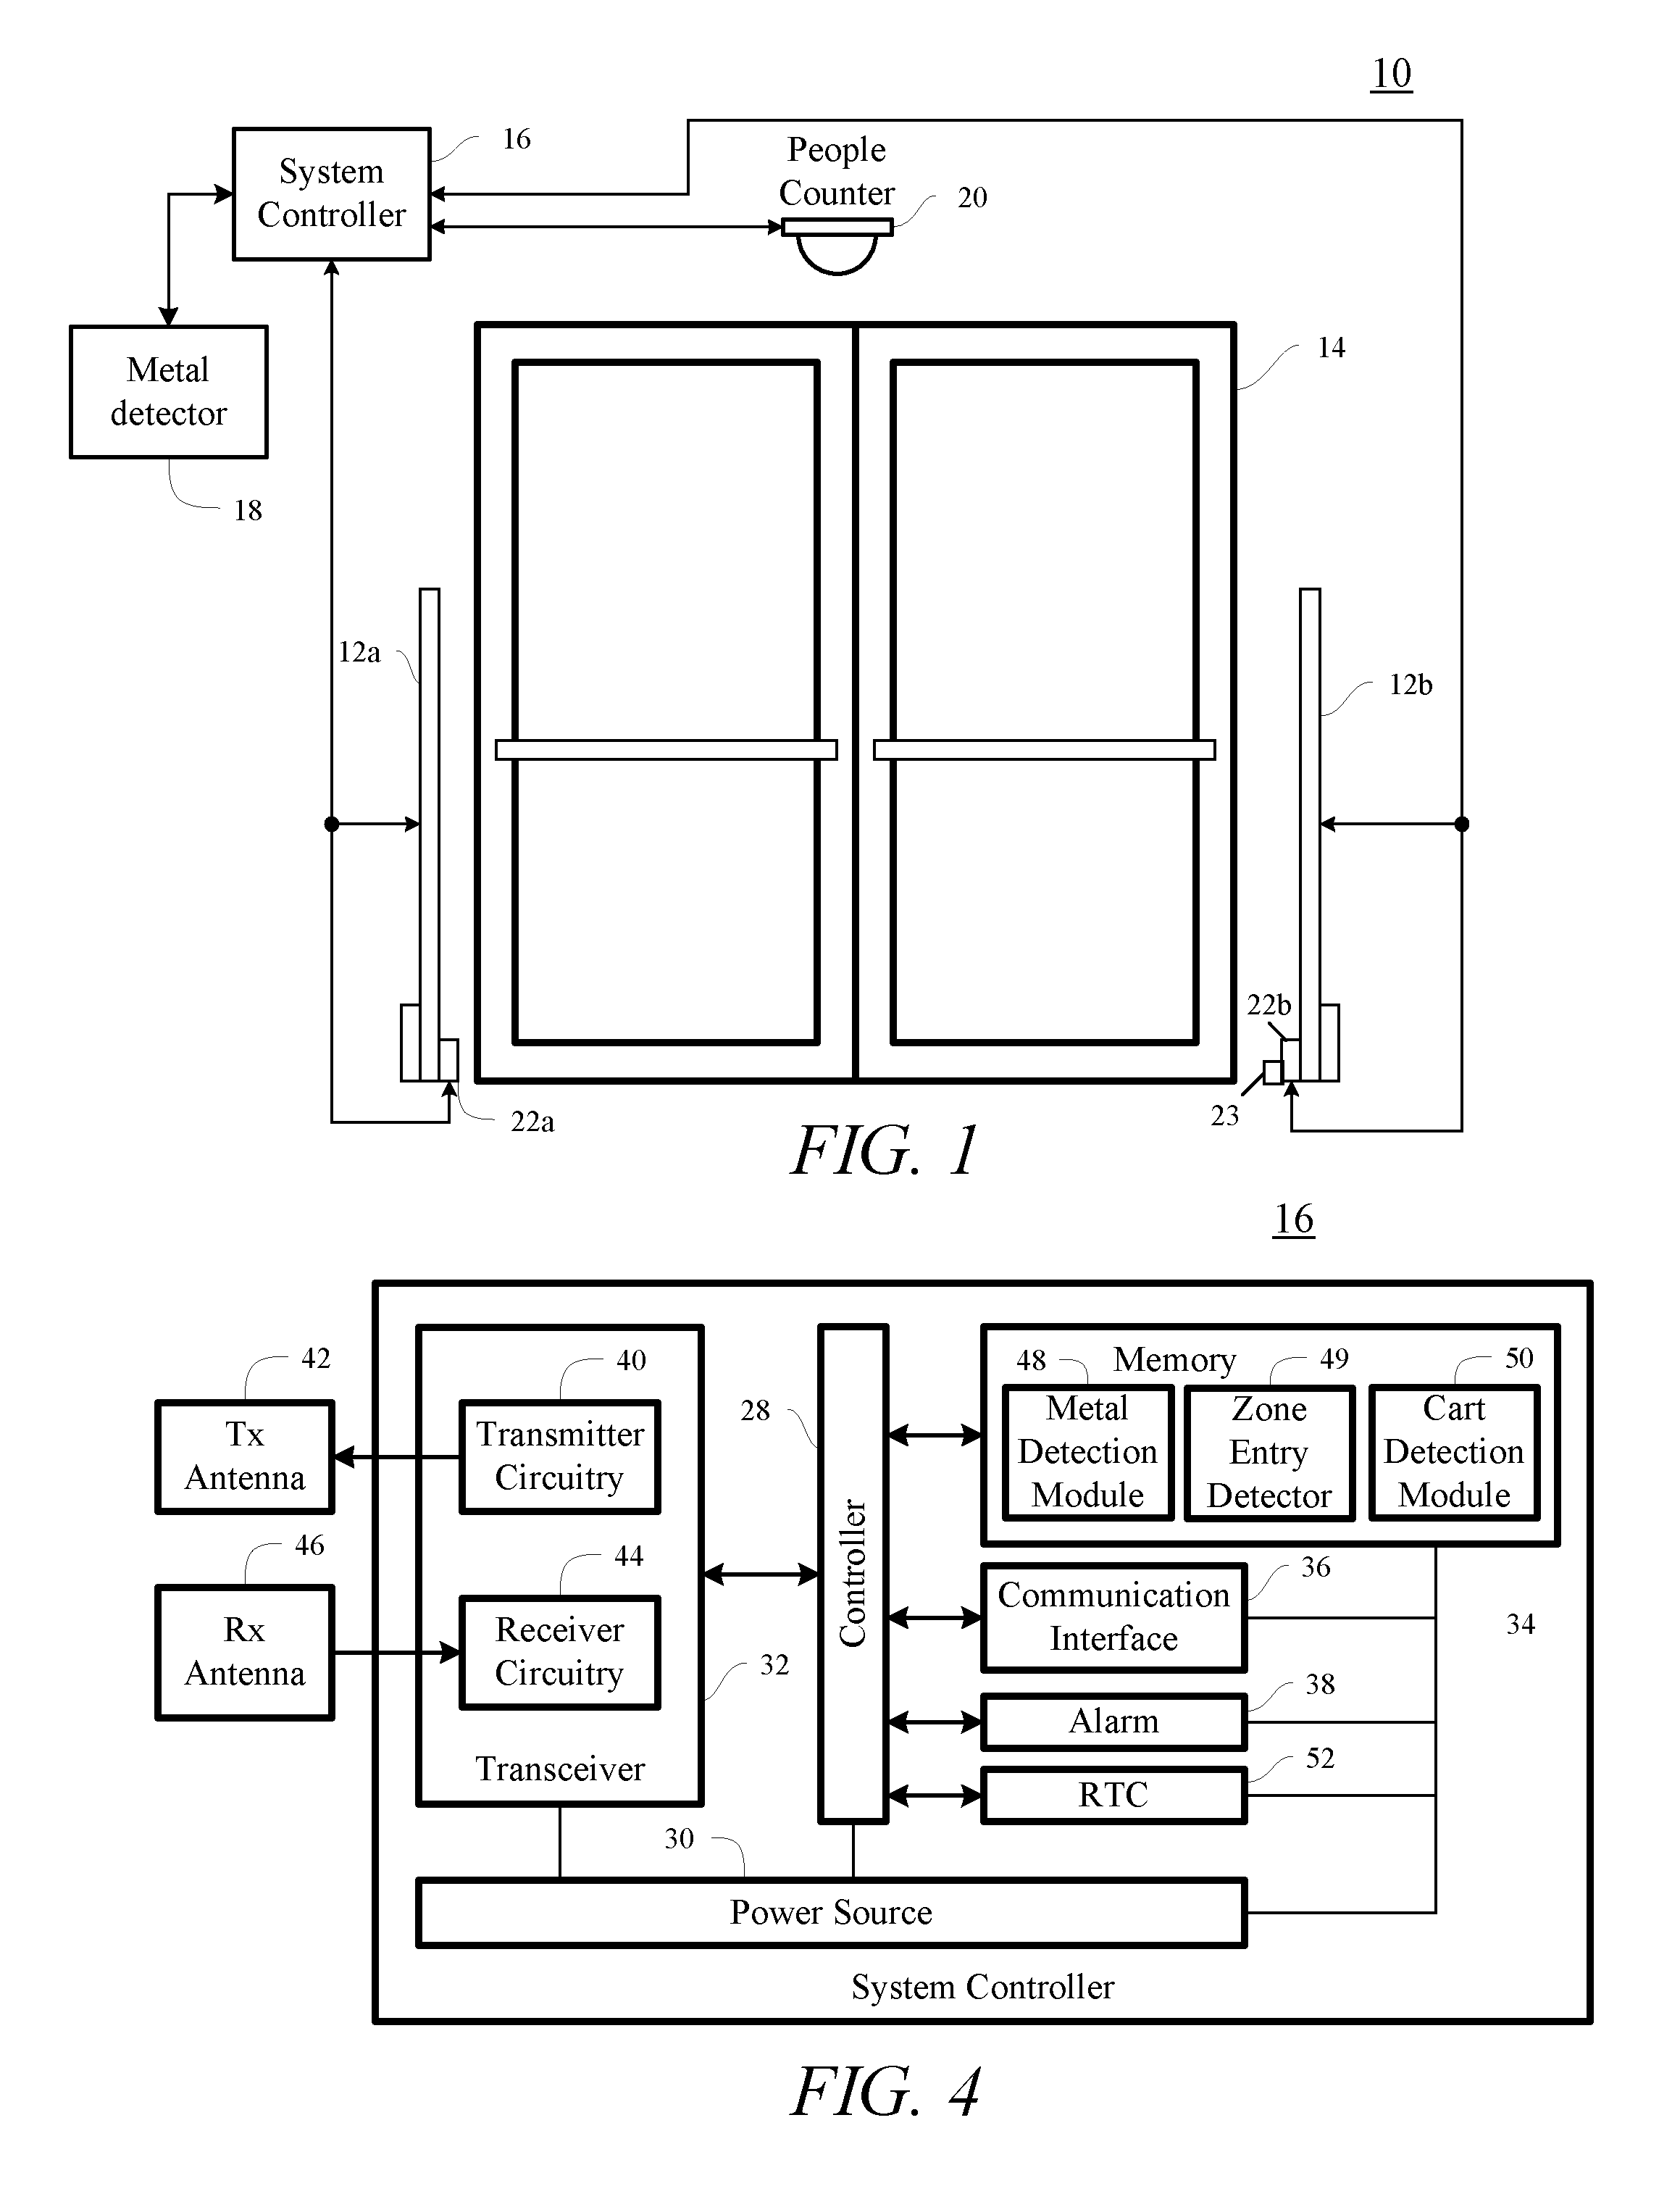 System and method using proximity detection for reducing cart alarms and increasing sensitivity in an eas system with metal shielding detection